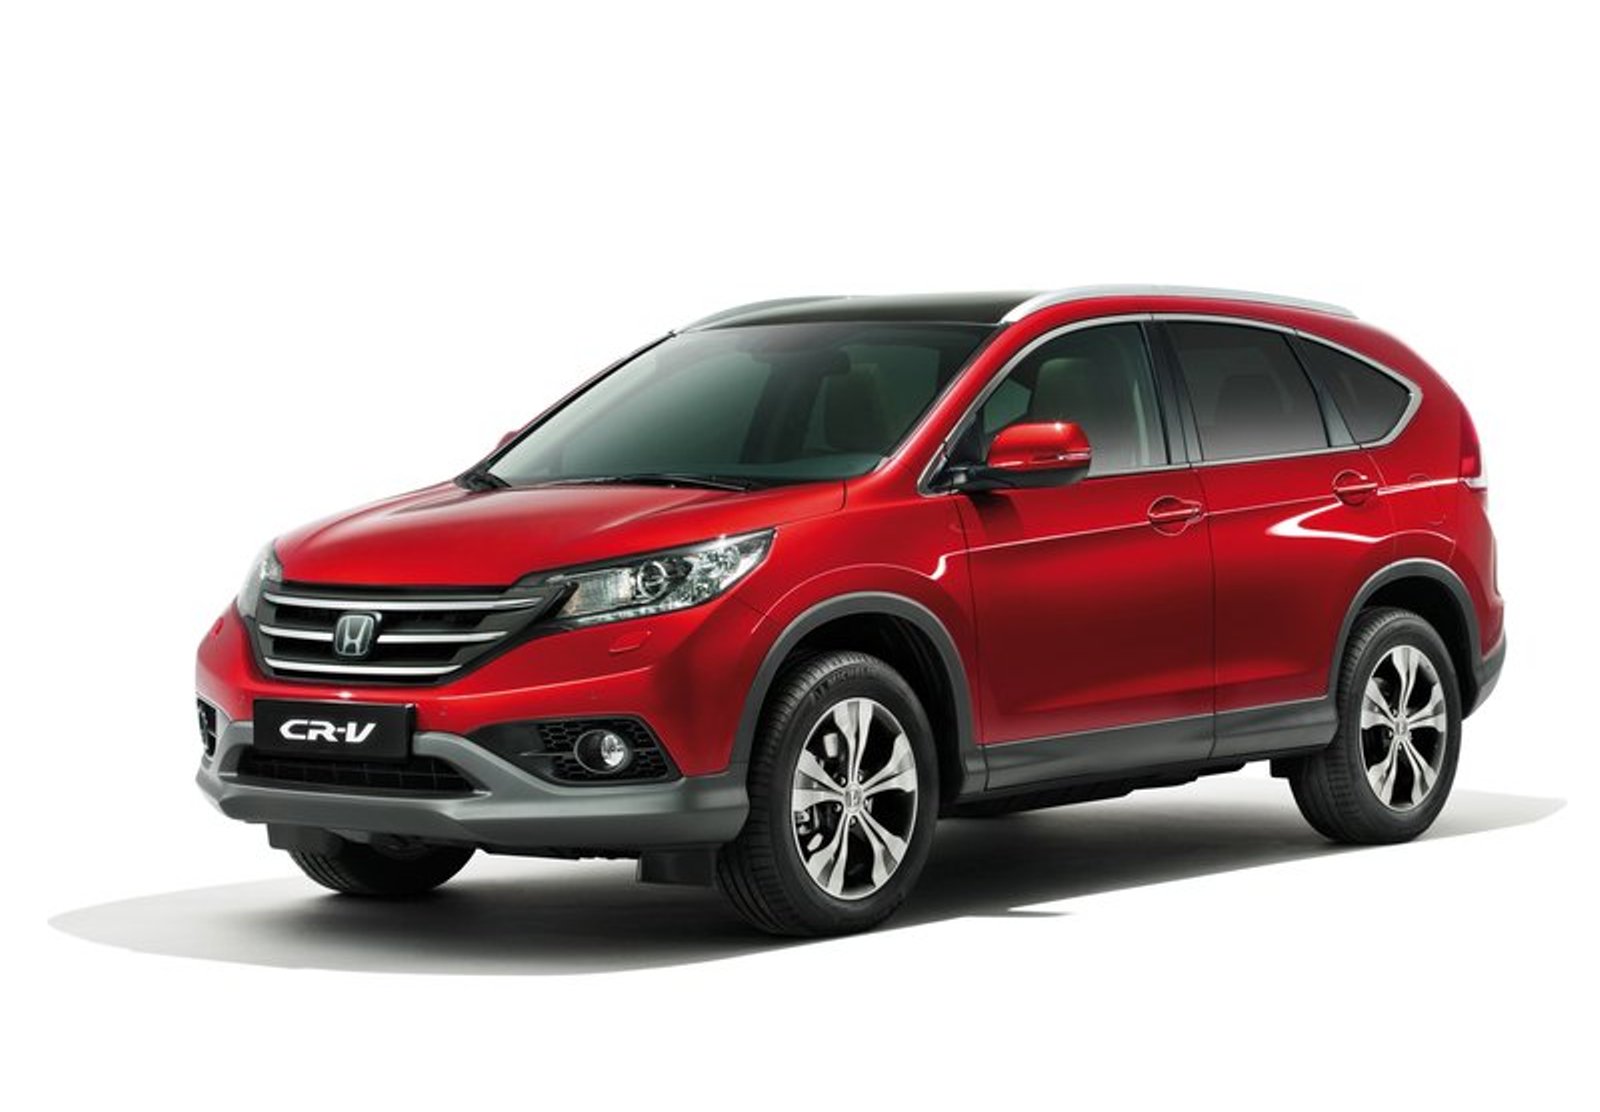 New Honda CR-V expected to be Launched soon